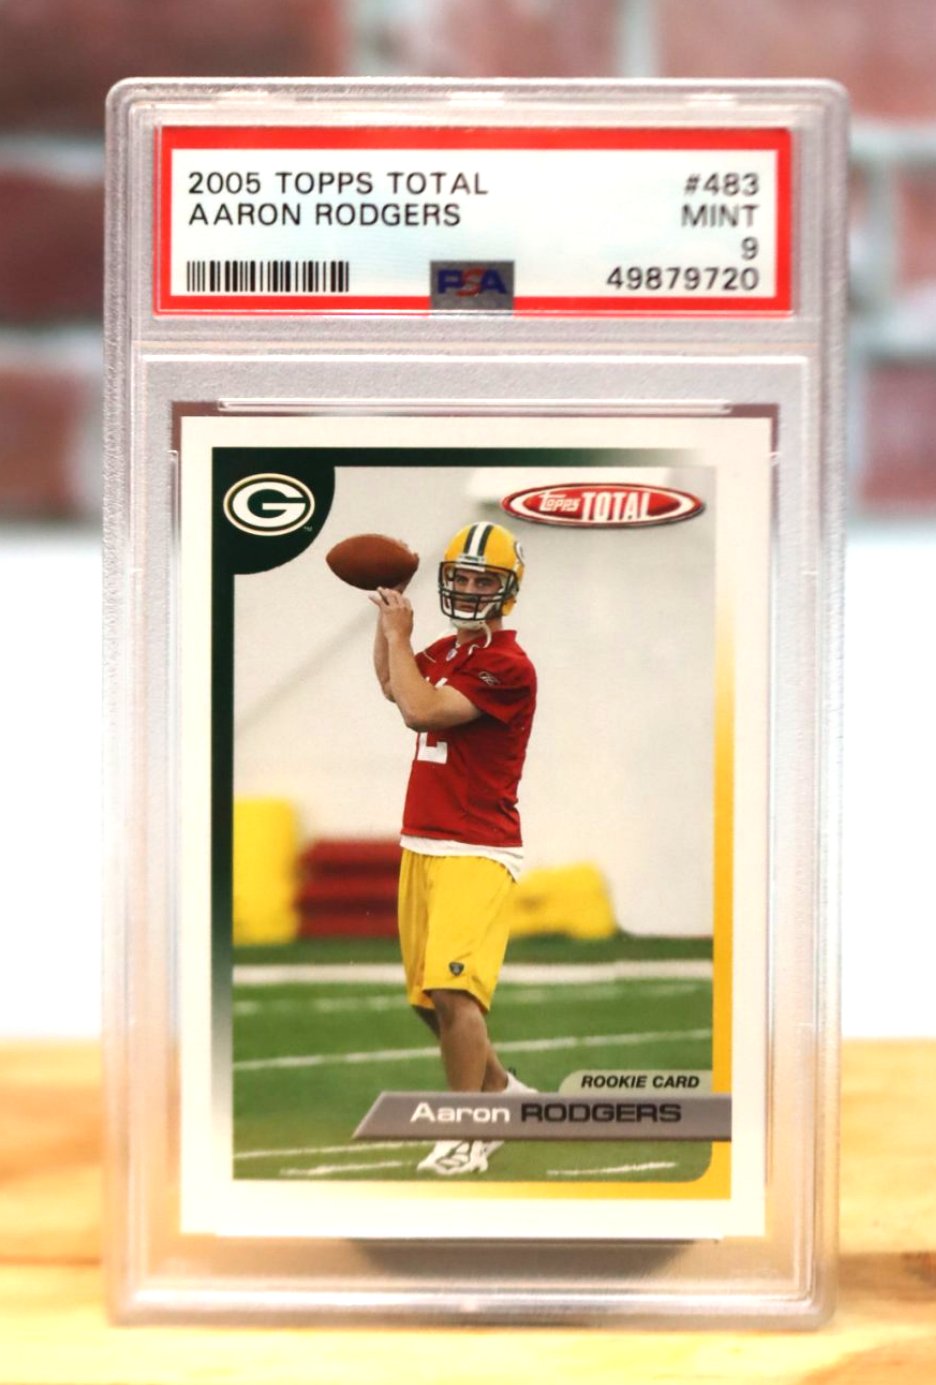 2005 Topps Total Aaron Rodgers Rookie Card PSA 9